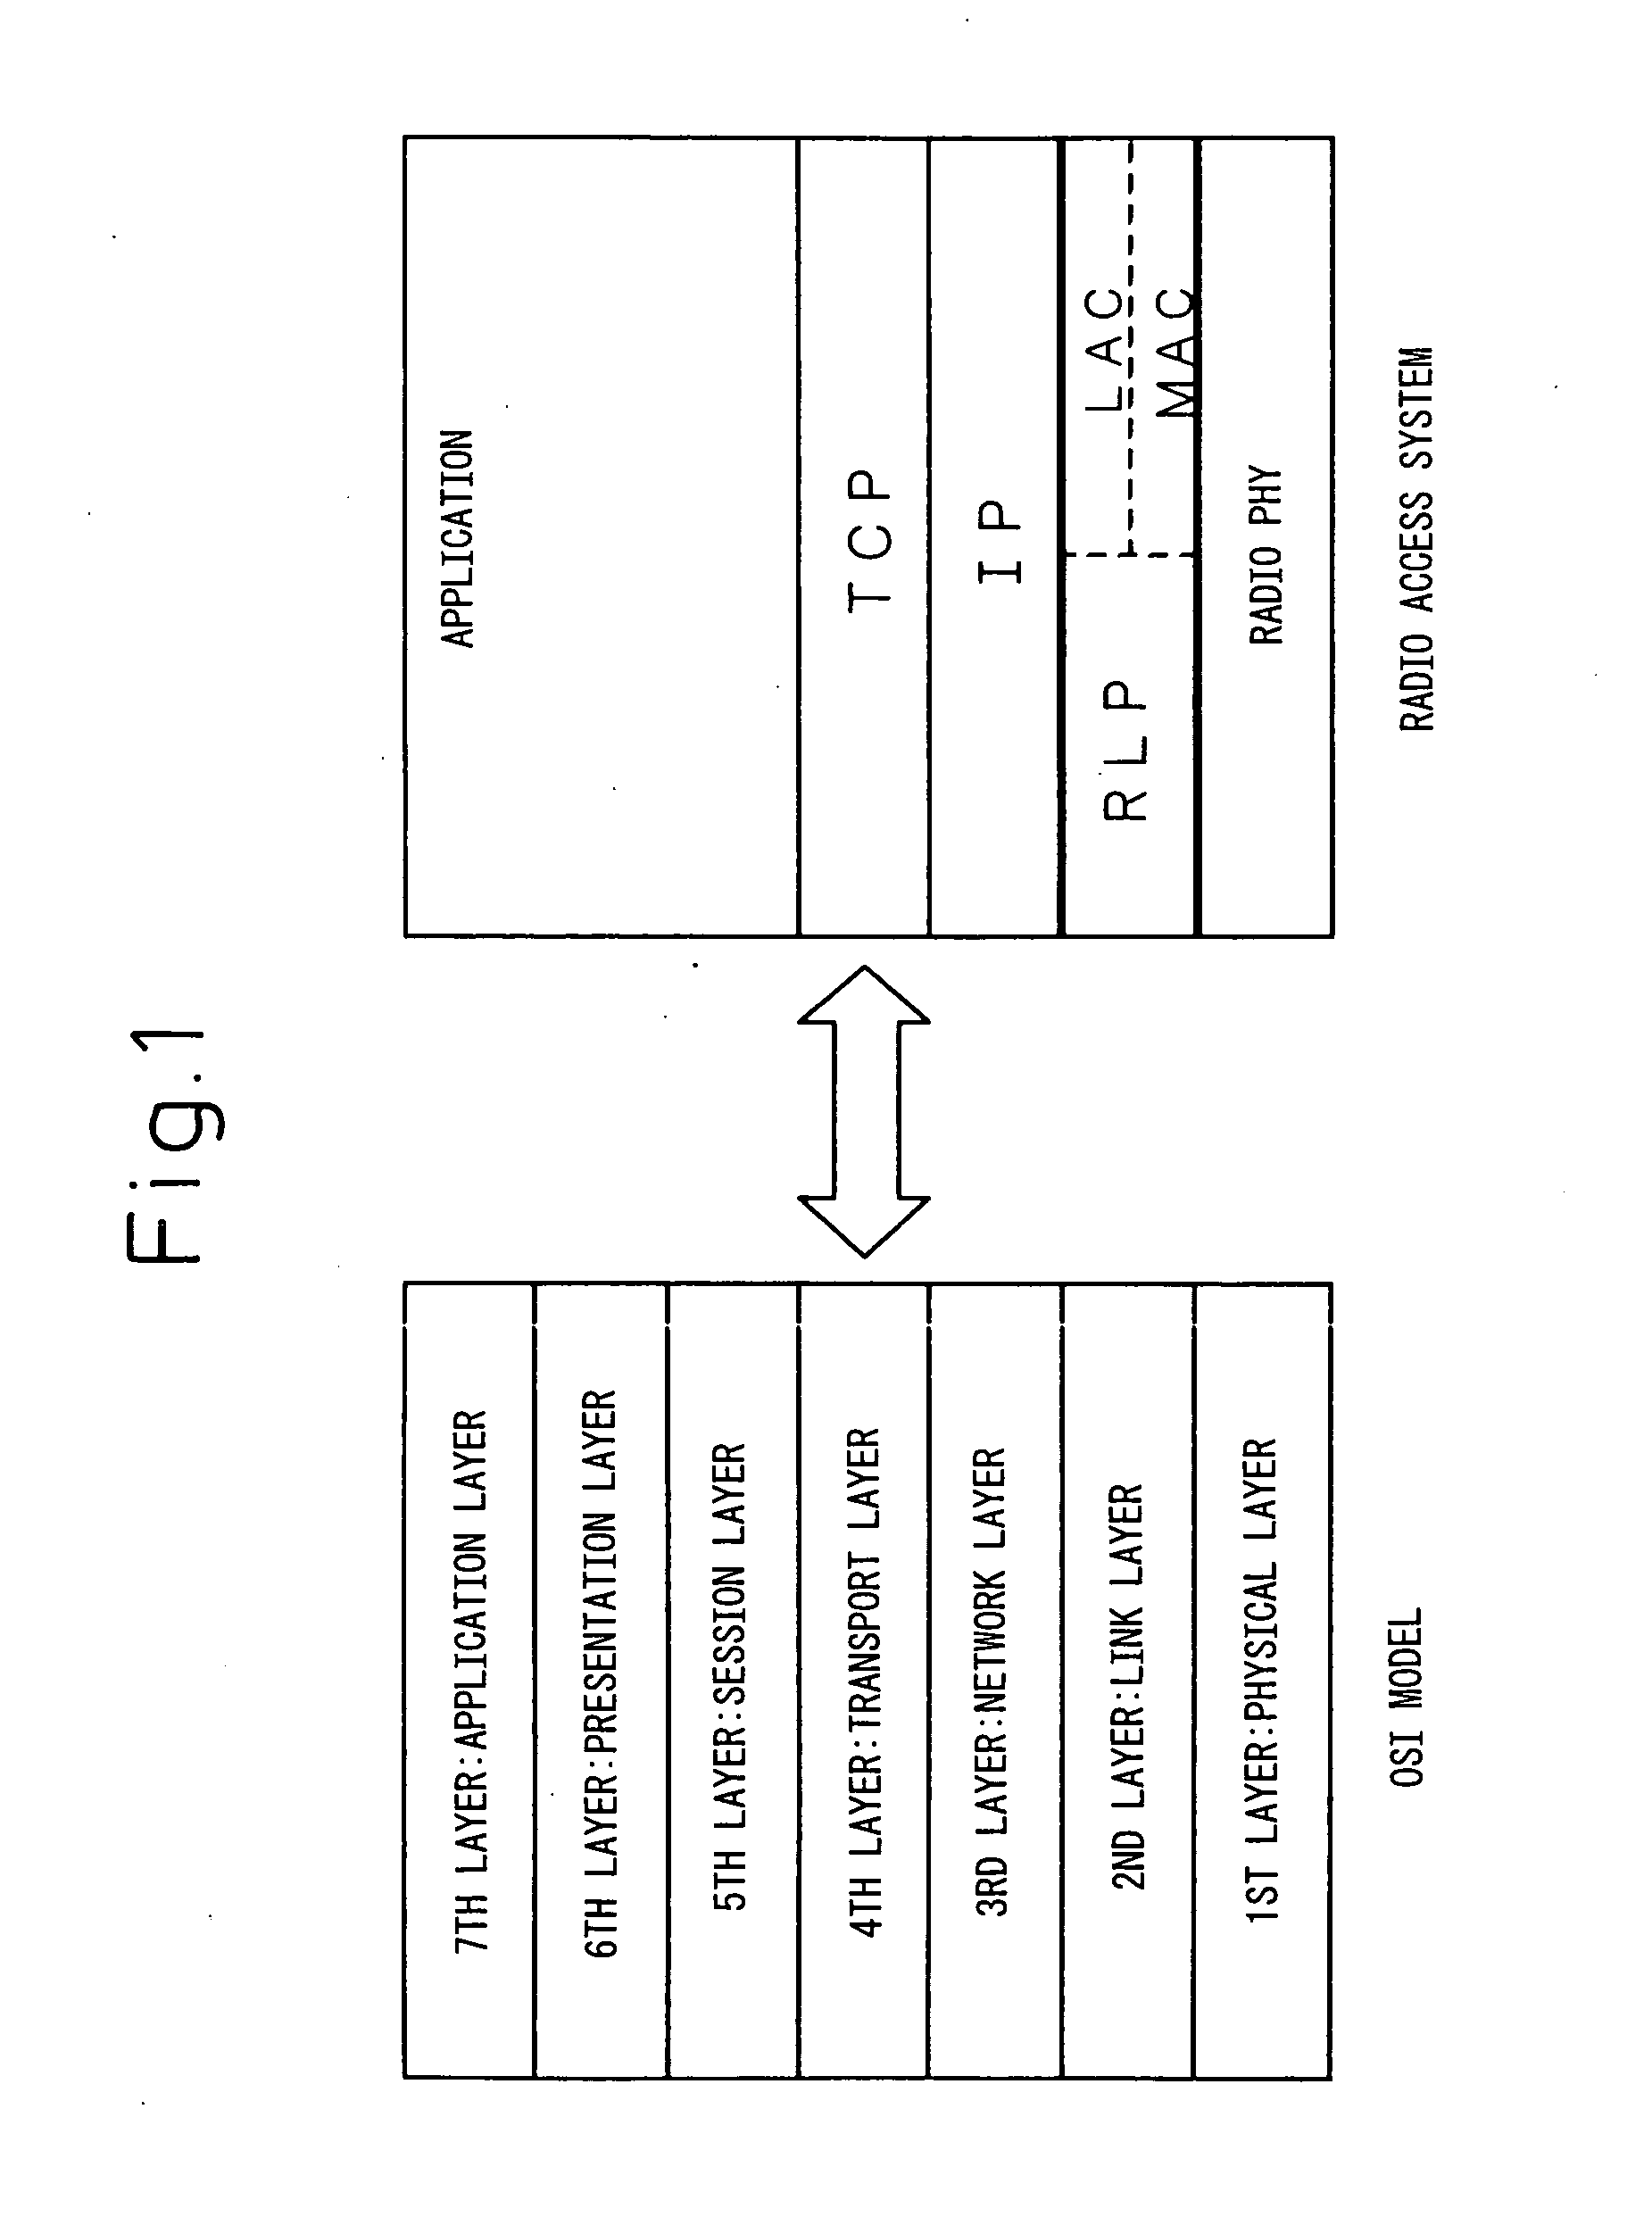 Mobile terminal and radio access point in radio access system